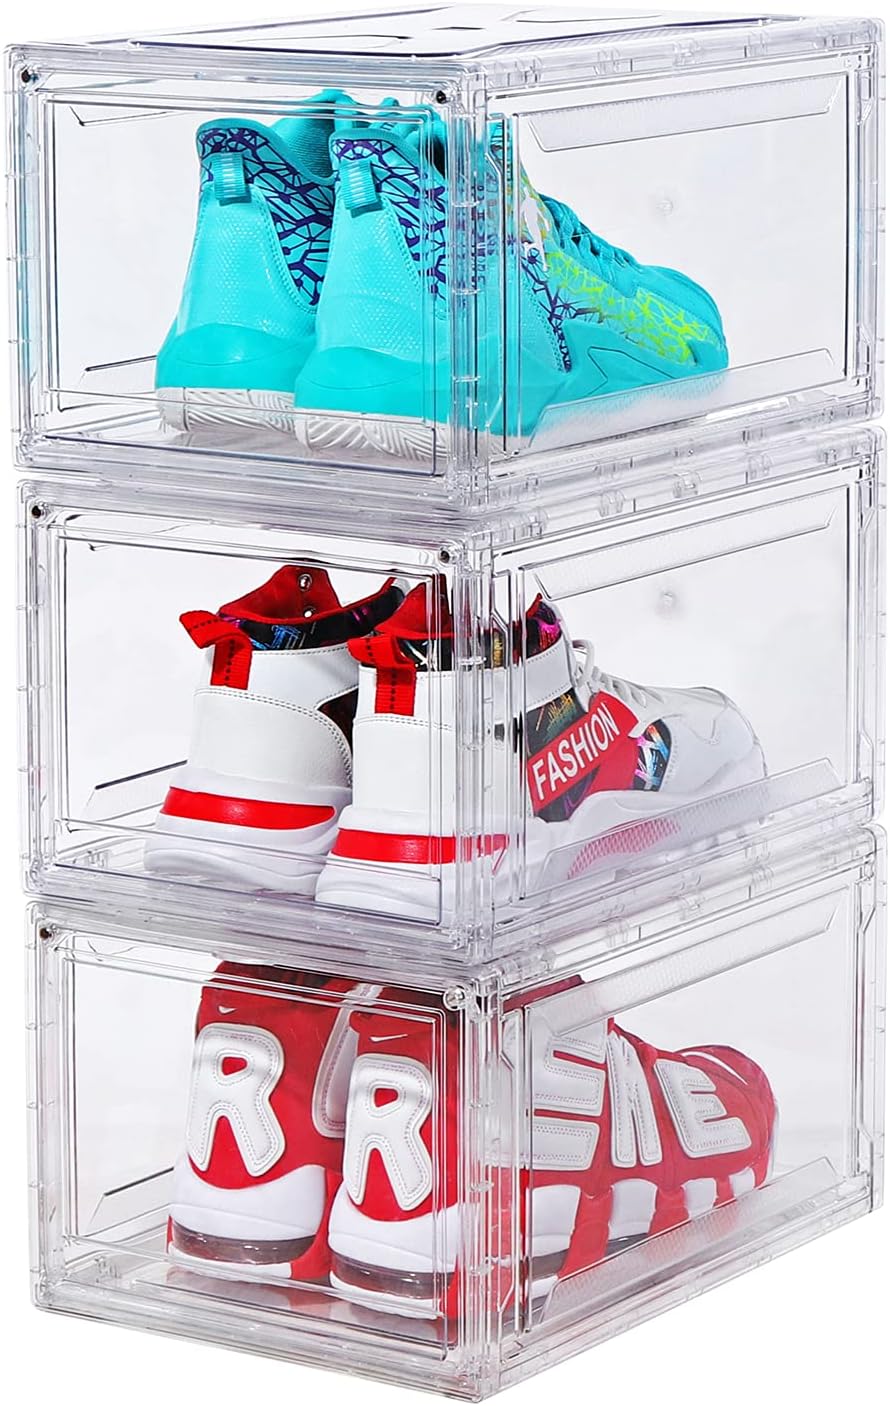 I was very pleased with this product. I am an avid shoe collector and these protect from all dust, debris and otherwise elements that can comprise the integrity of your kicks. These stack well and I opted for the clear version so you can see the shoes and gives them the display look in your place of storage. The cases themselves were very easy to assemble. I also cracked and bent a few tabs when I was putting this together but the design is SO resilient that each piece snapped together tightly a